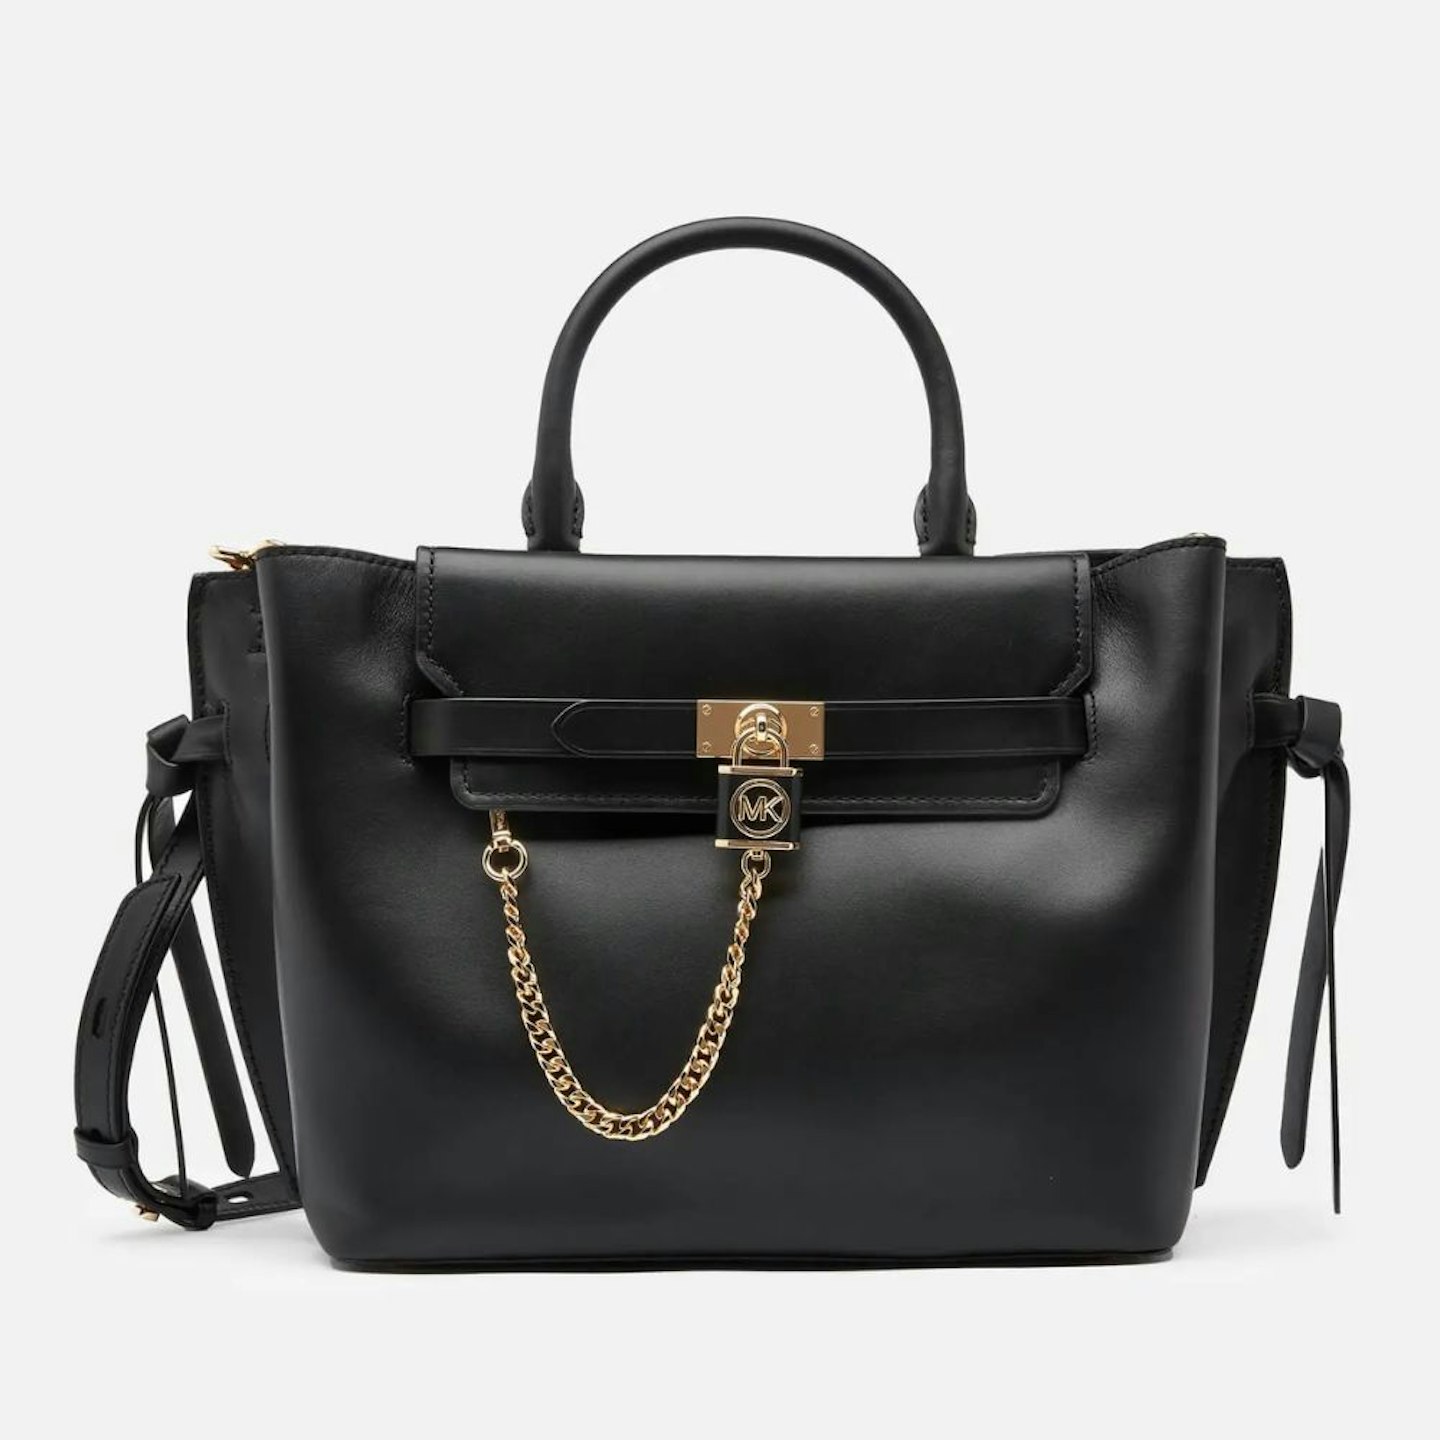 Black Friday: Designer Handbags for an Additional Discount - cathclaire